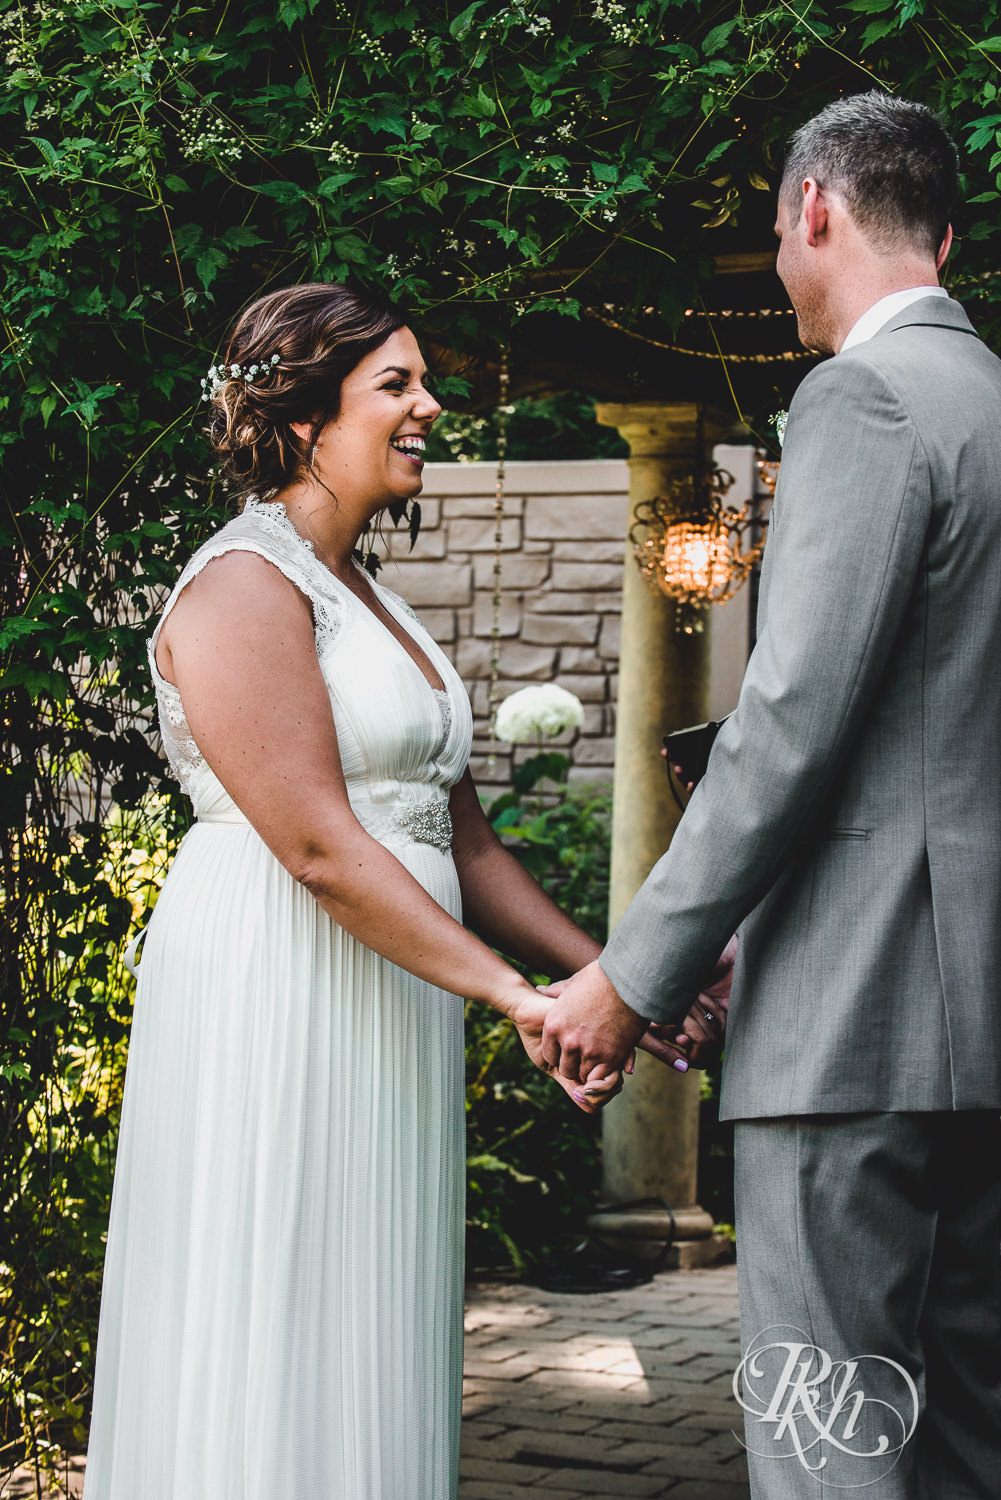 Bride and groom smile during wedding ceremony at Camrose Hill Flower Farm in Stillwater, Minnesota.